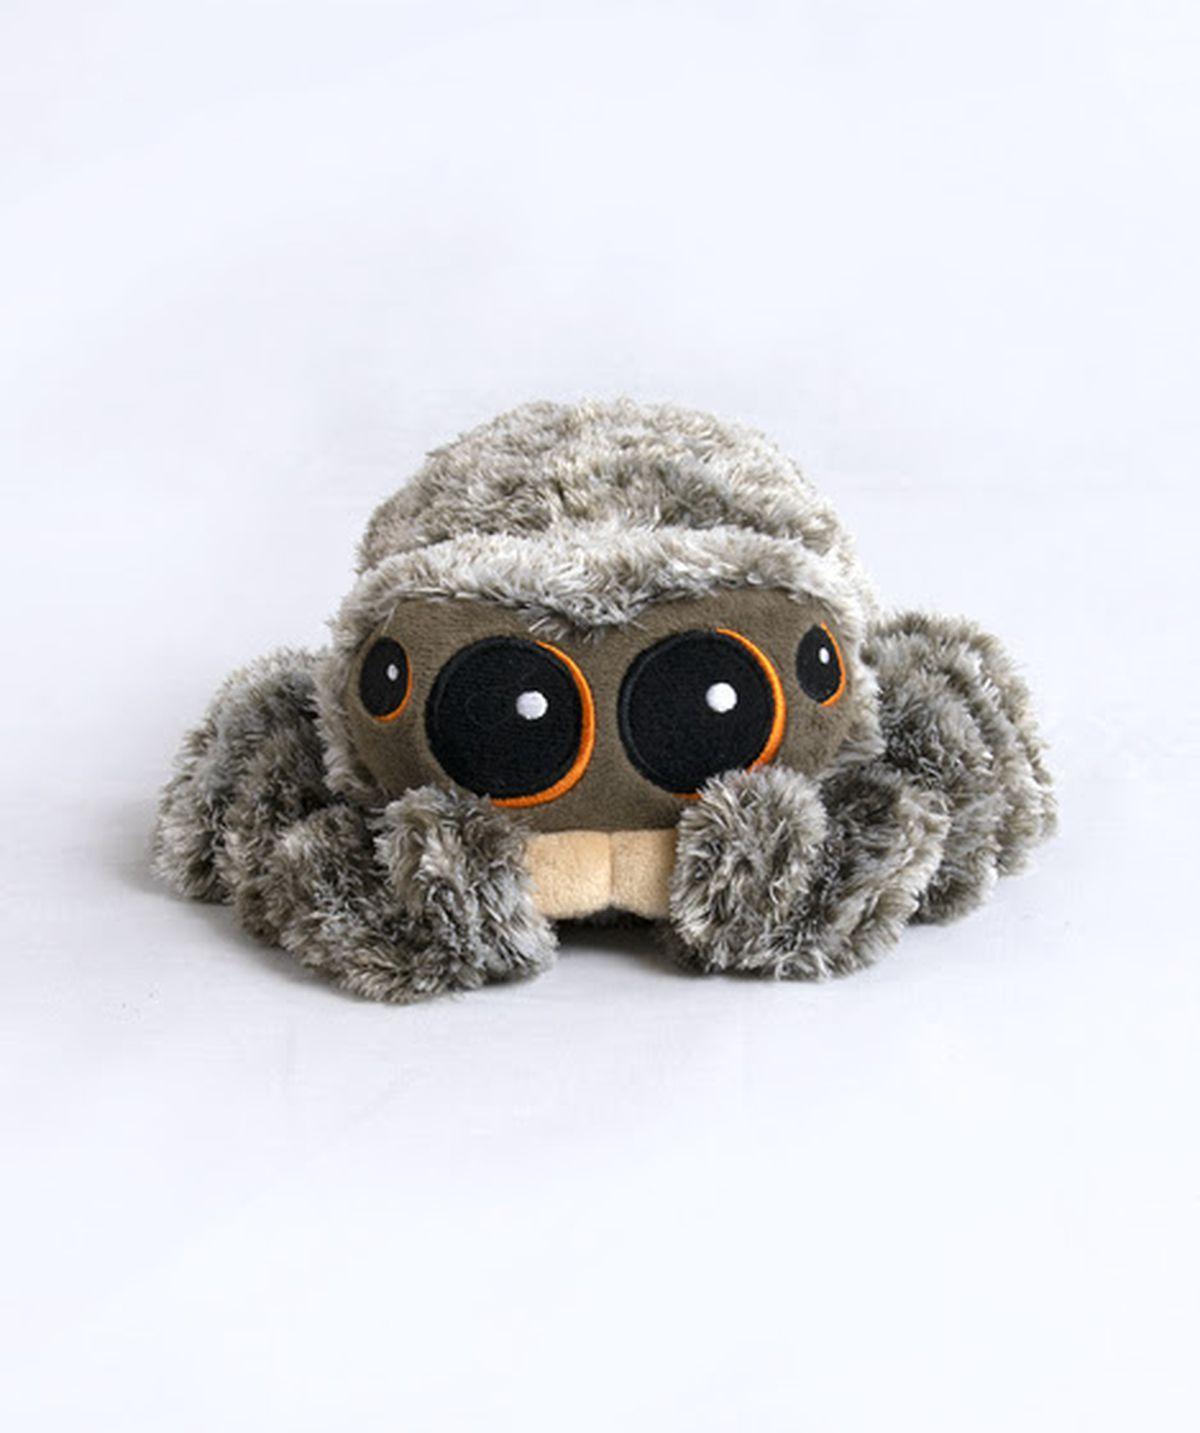 Lucas the Spider' is getting official merch, cementing his status as